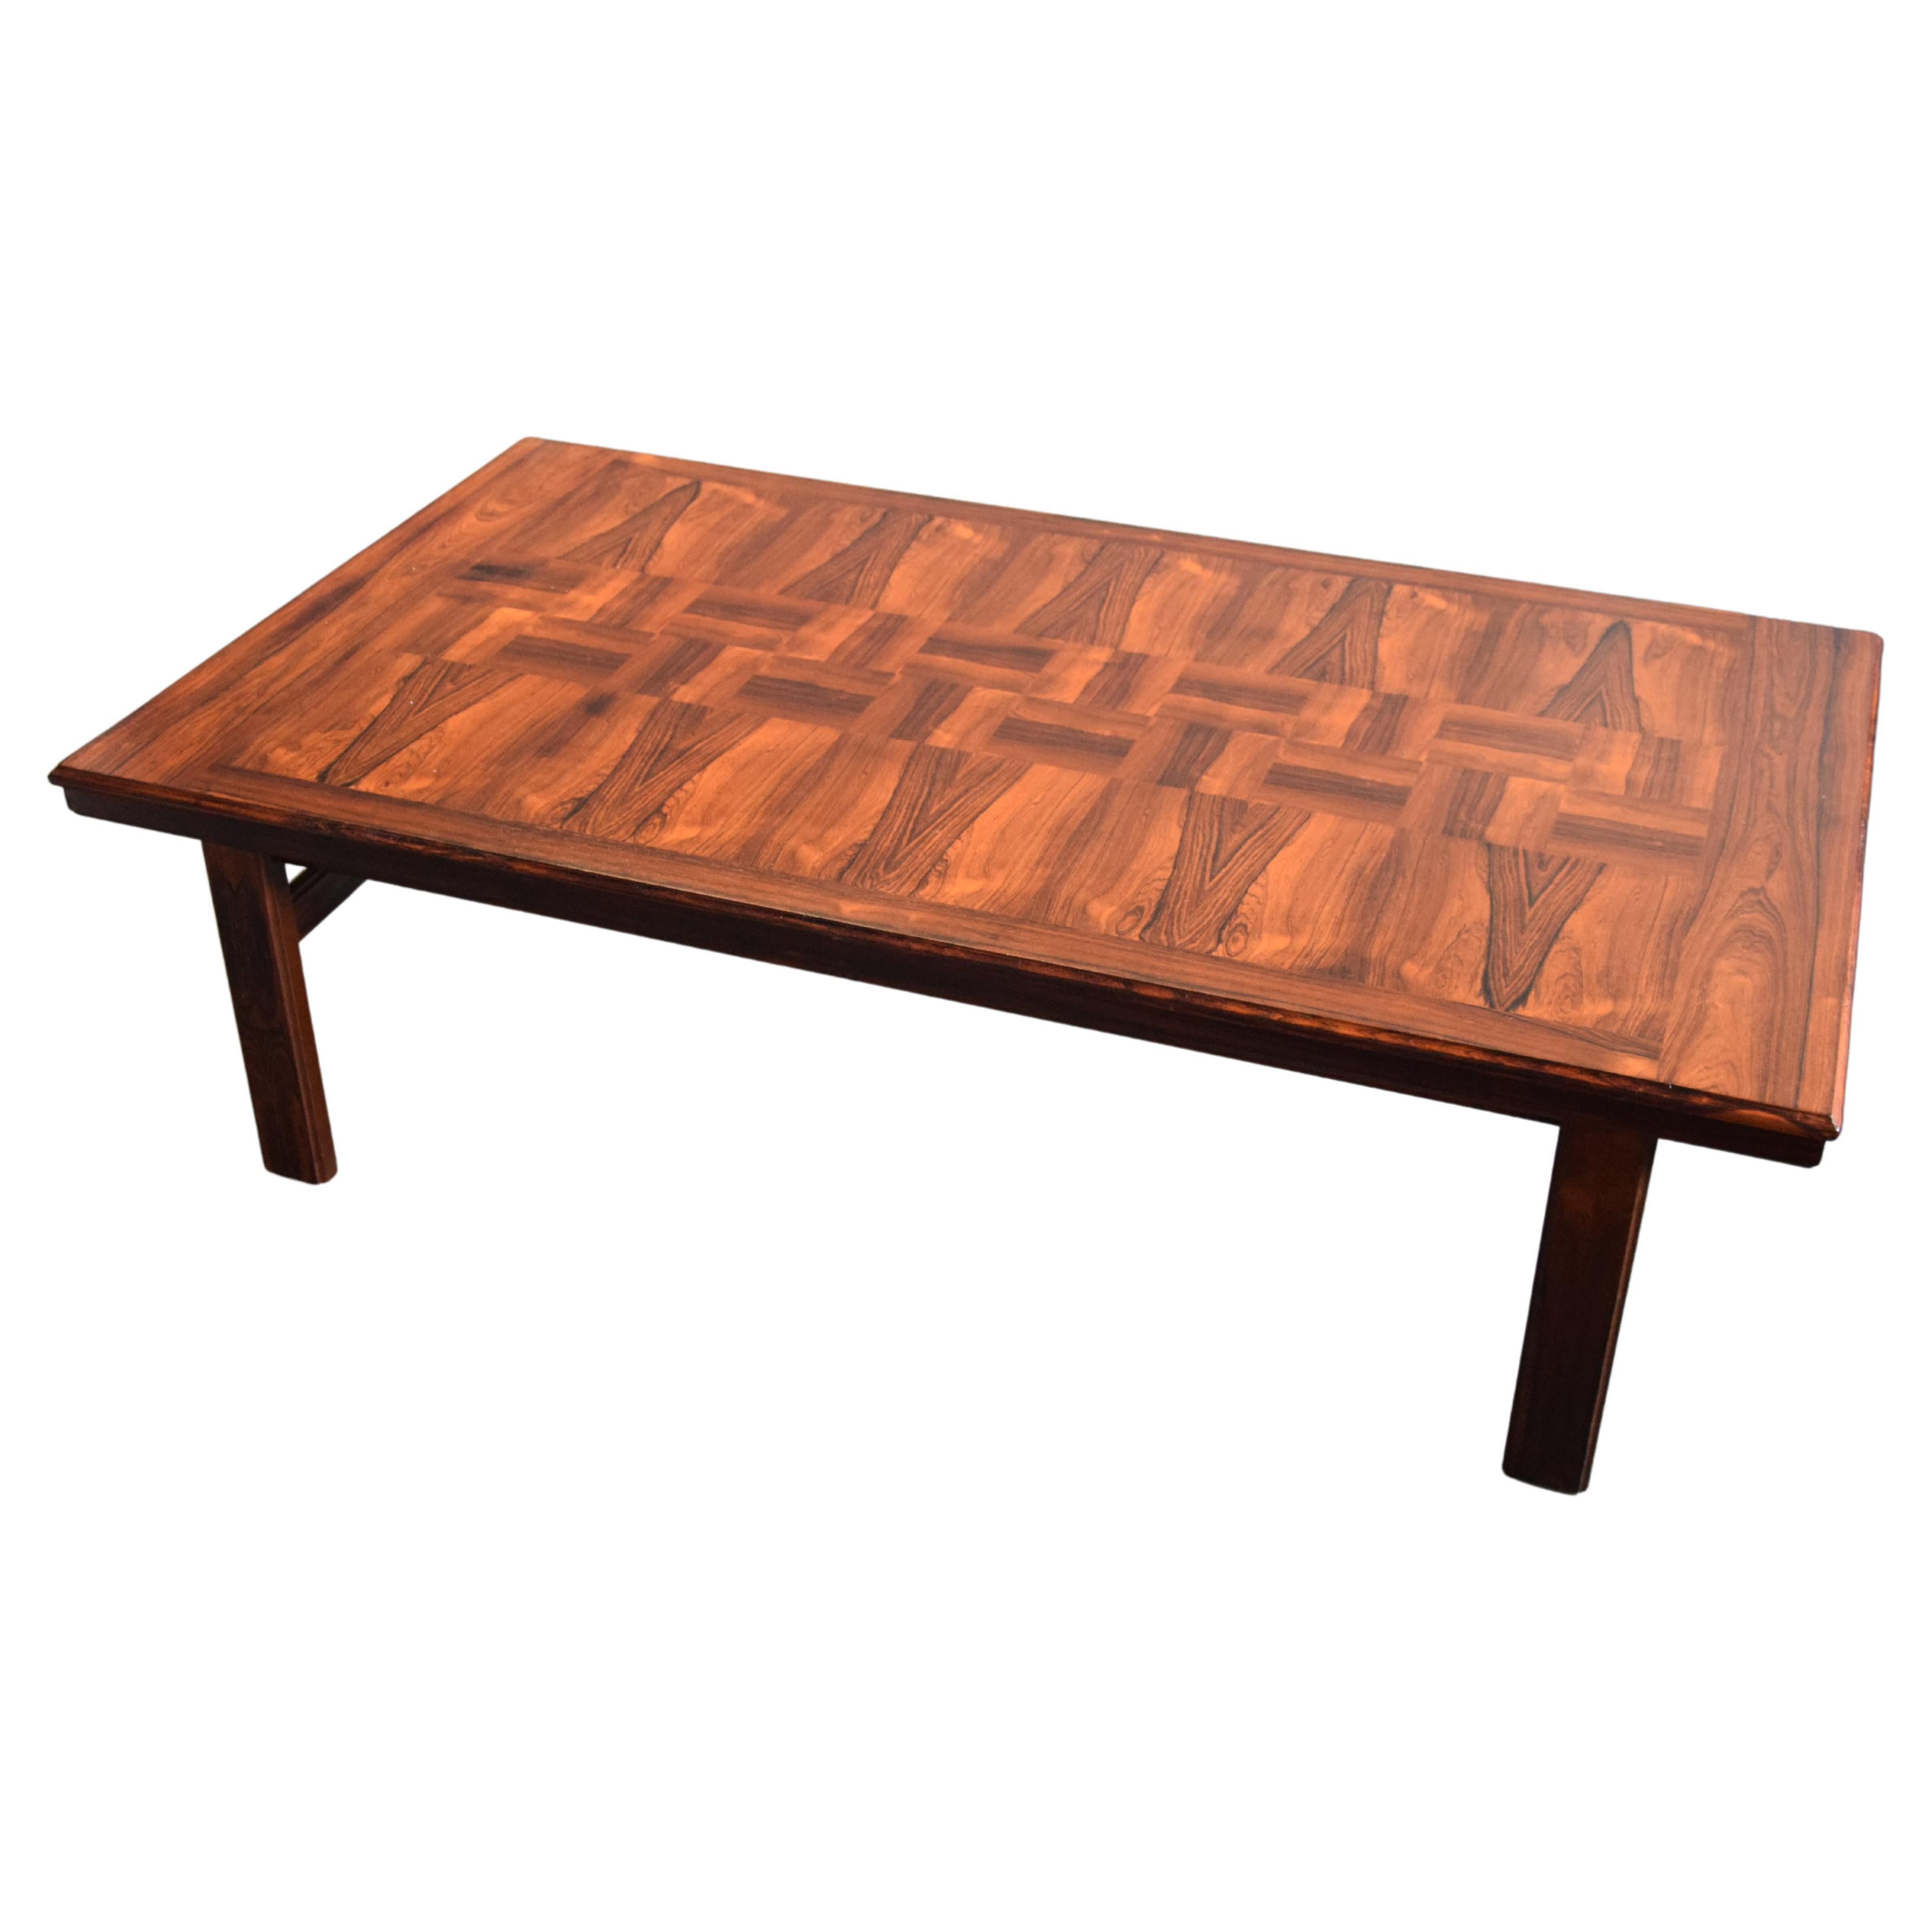 Norwegian Mid-Century Modern Wooden Coffee Table For Sale